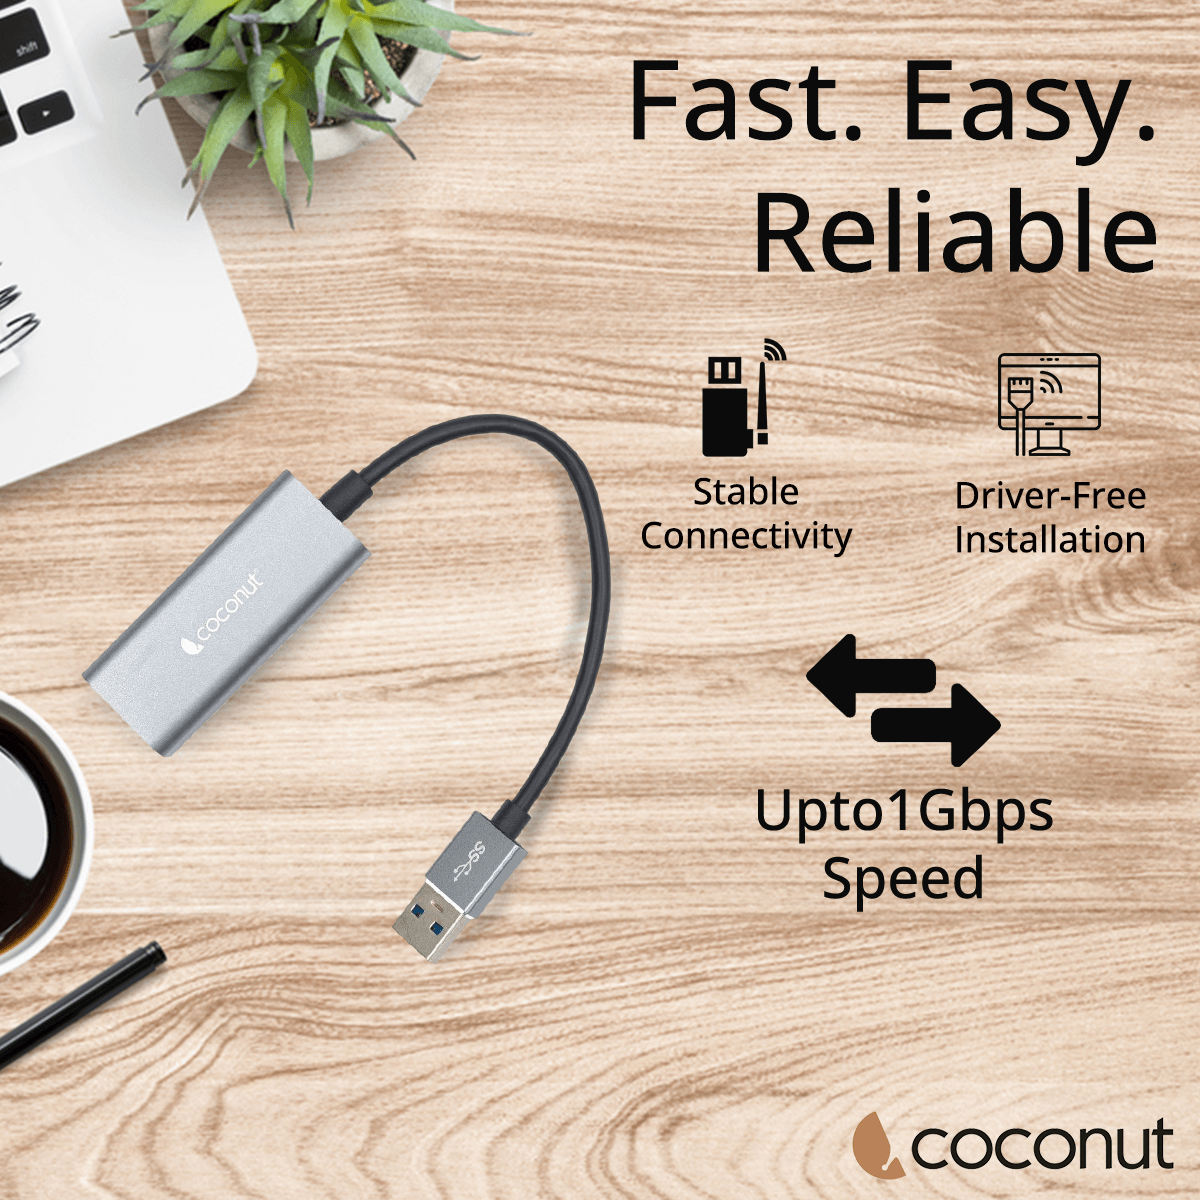 USB to LAN Ethernet Adapter,Type C to RJ45 up to 1000Mbps| Metal body, Plug & Play, Compact Design